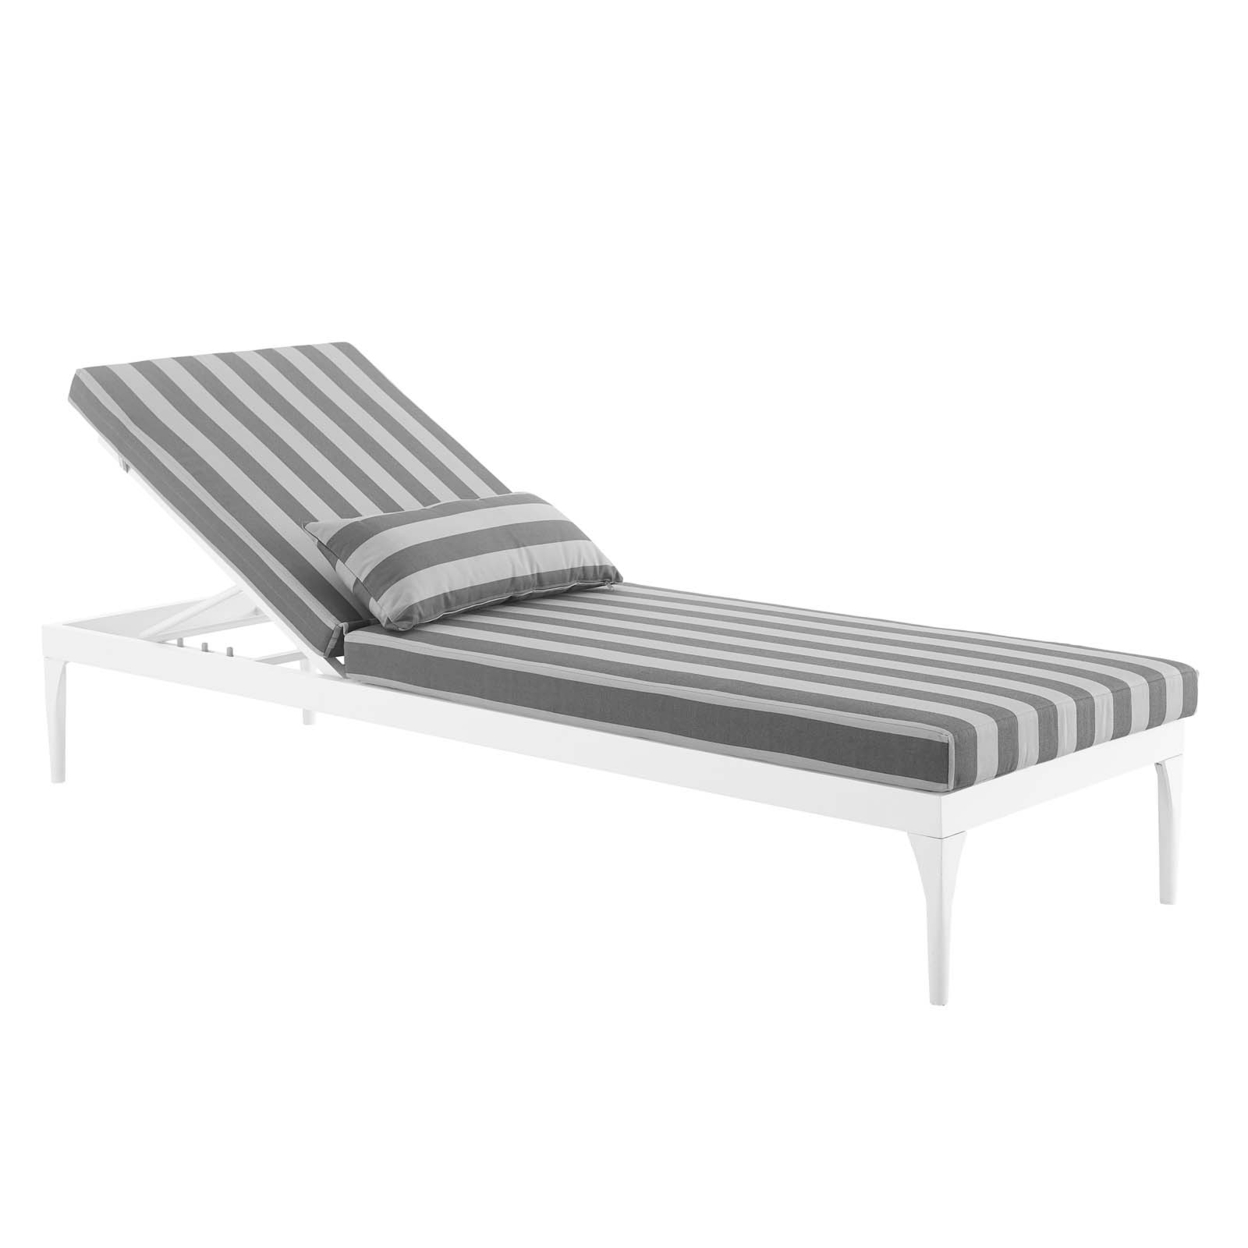 Perspective Cushion Outdoor Patio Chaise Lounge Chair,White Striped Gray